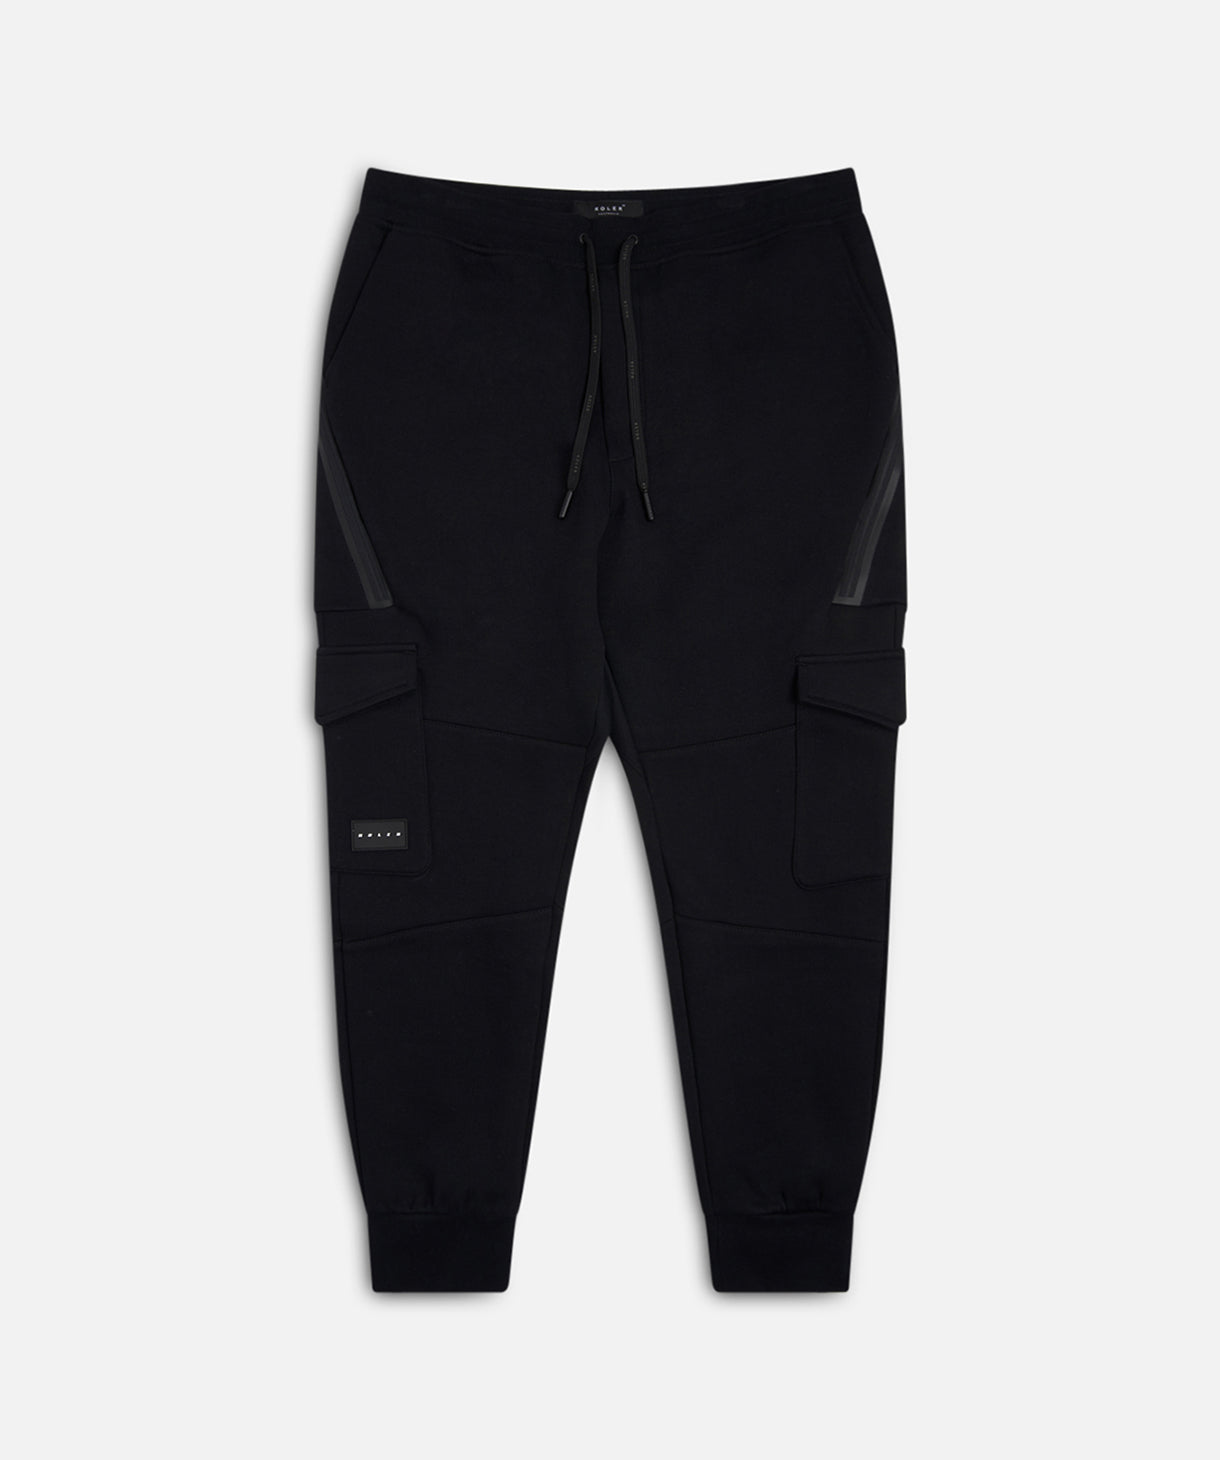 Shop The Tech Witton Cargo Pant in Black | Roler Clothing